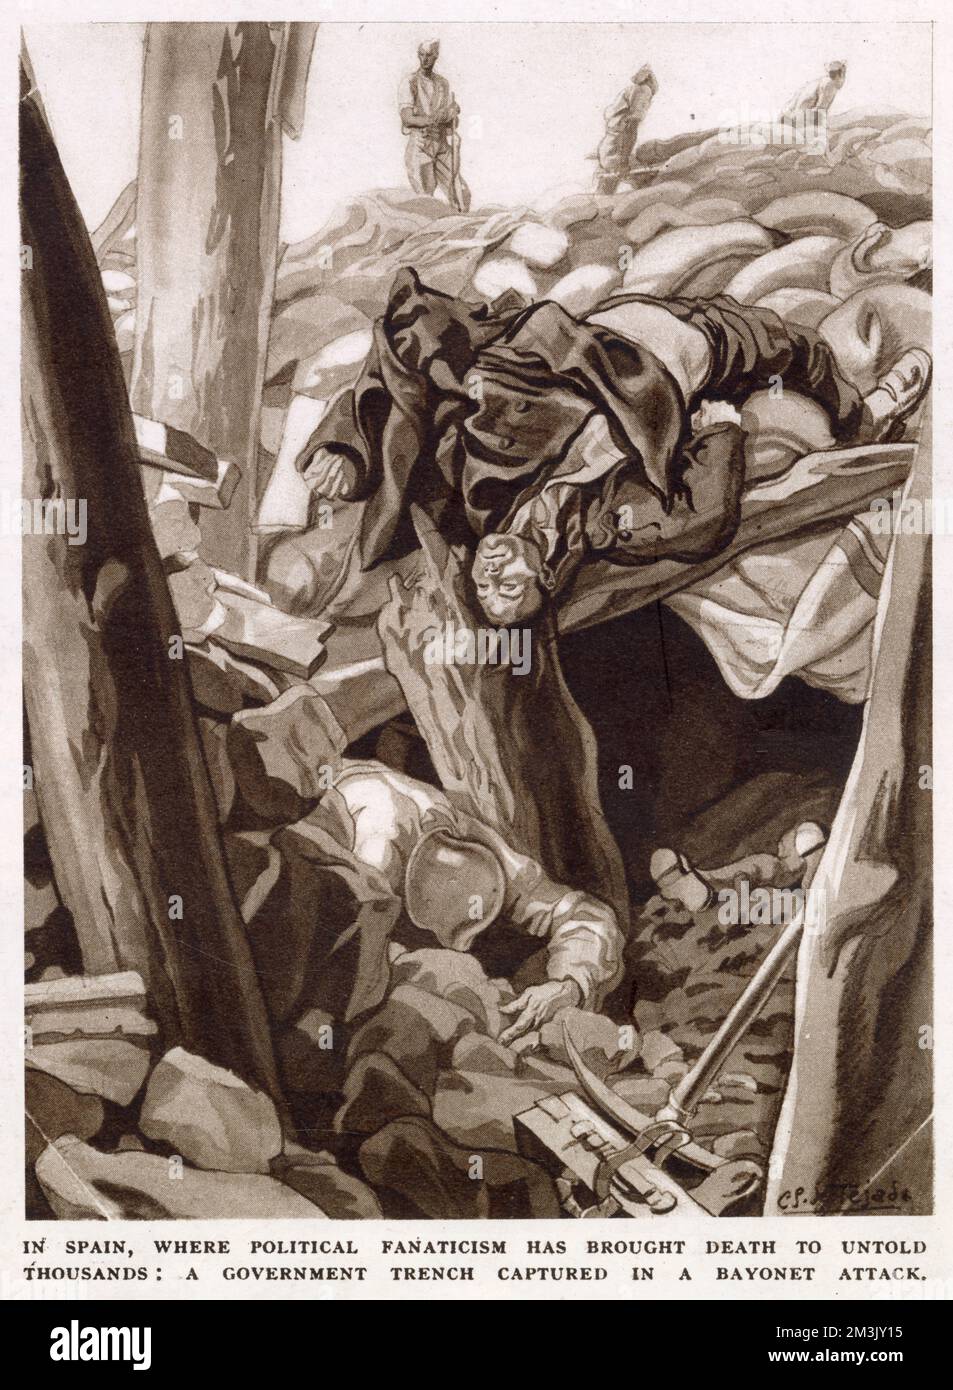 Two dead Republican soldiers in their trench, which had just been captured by Nationalist forces in fierce hand-to-hand combat; Spanish Civil War.  This illustration was made by an artist attached to the Nationalist forces and sympathetic to their cause. Stock Photo